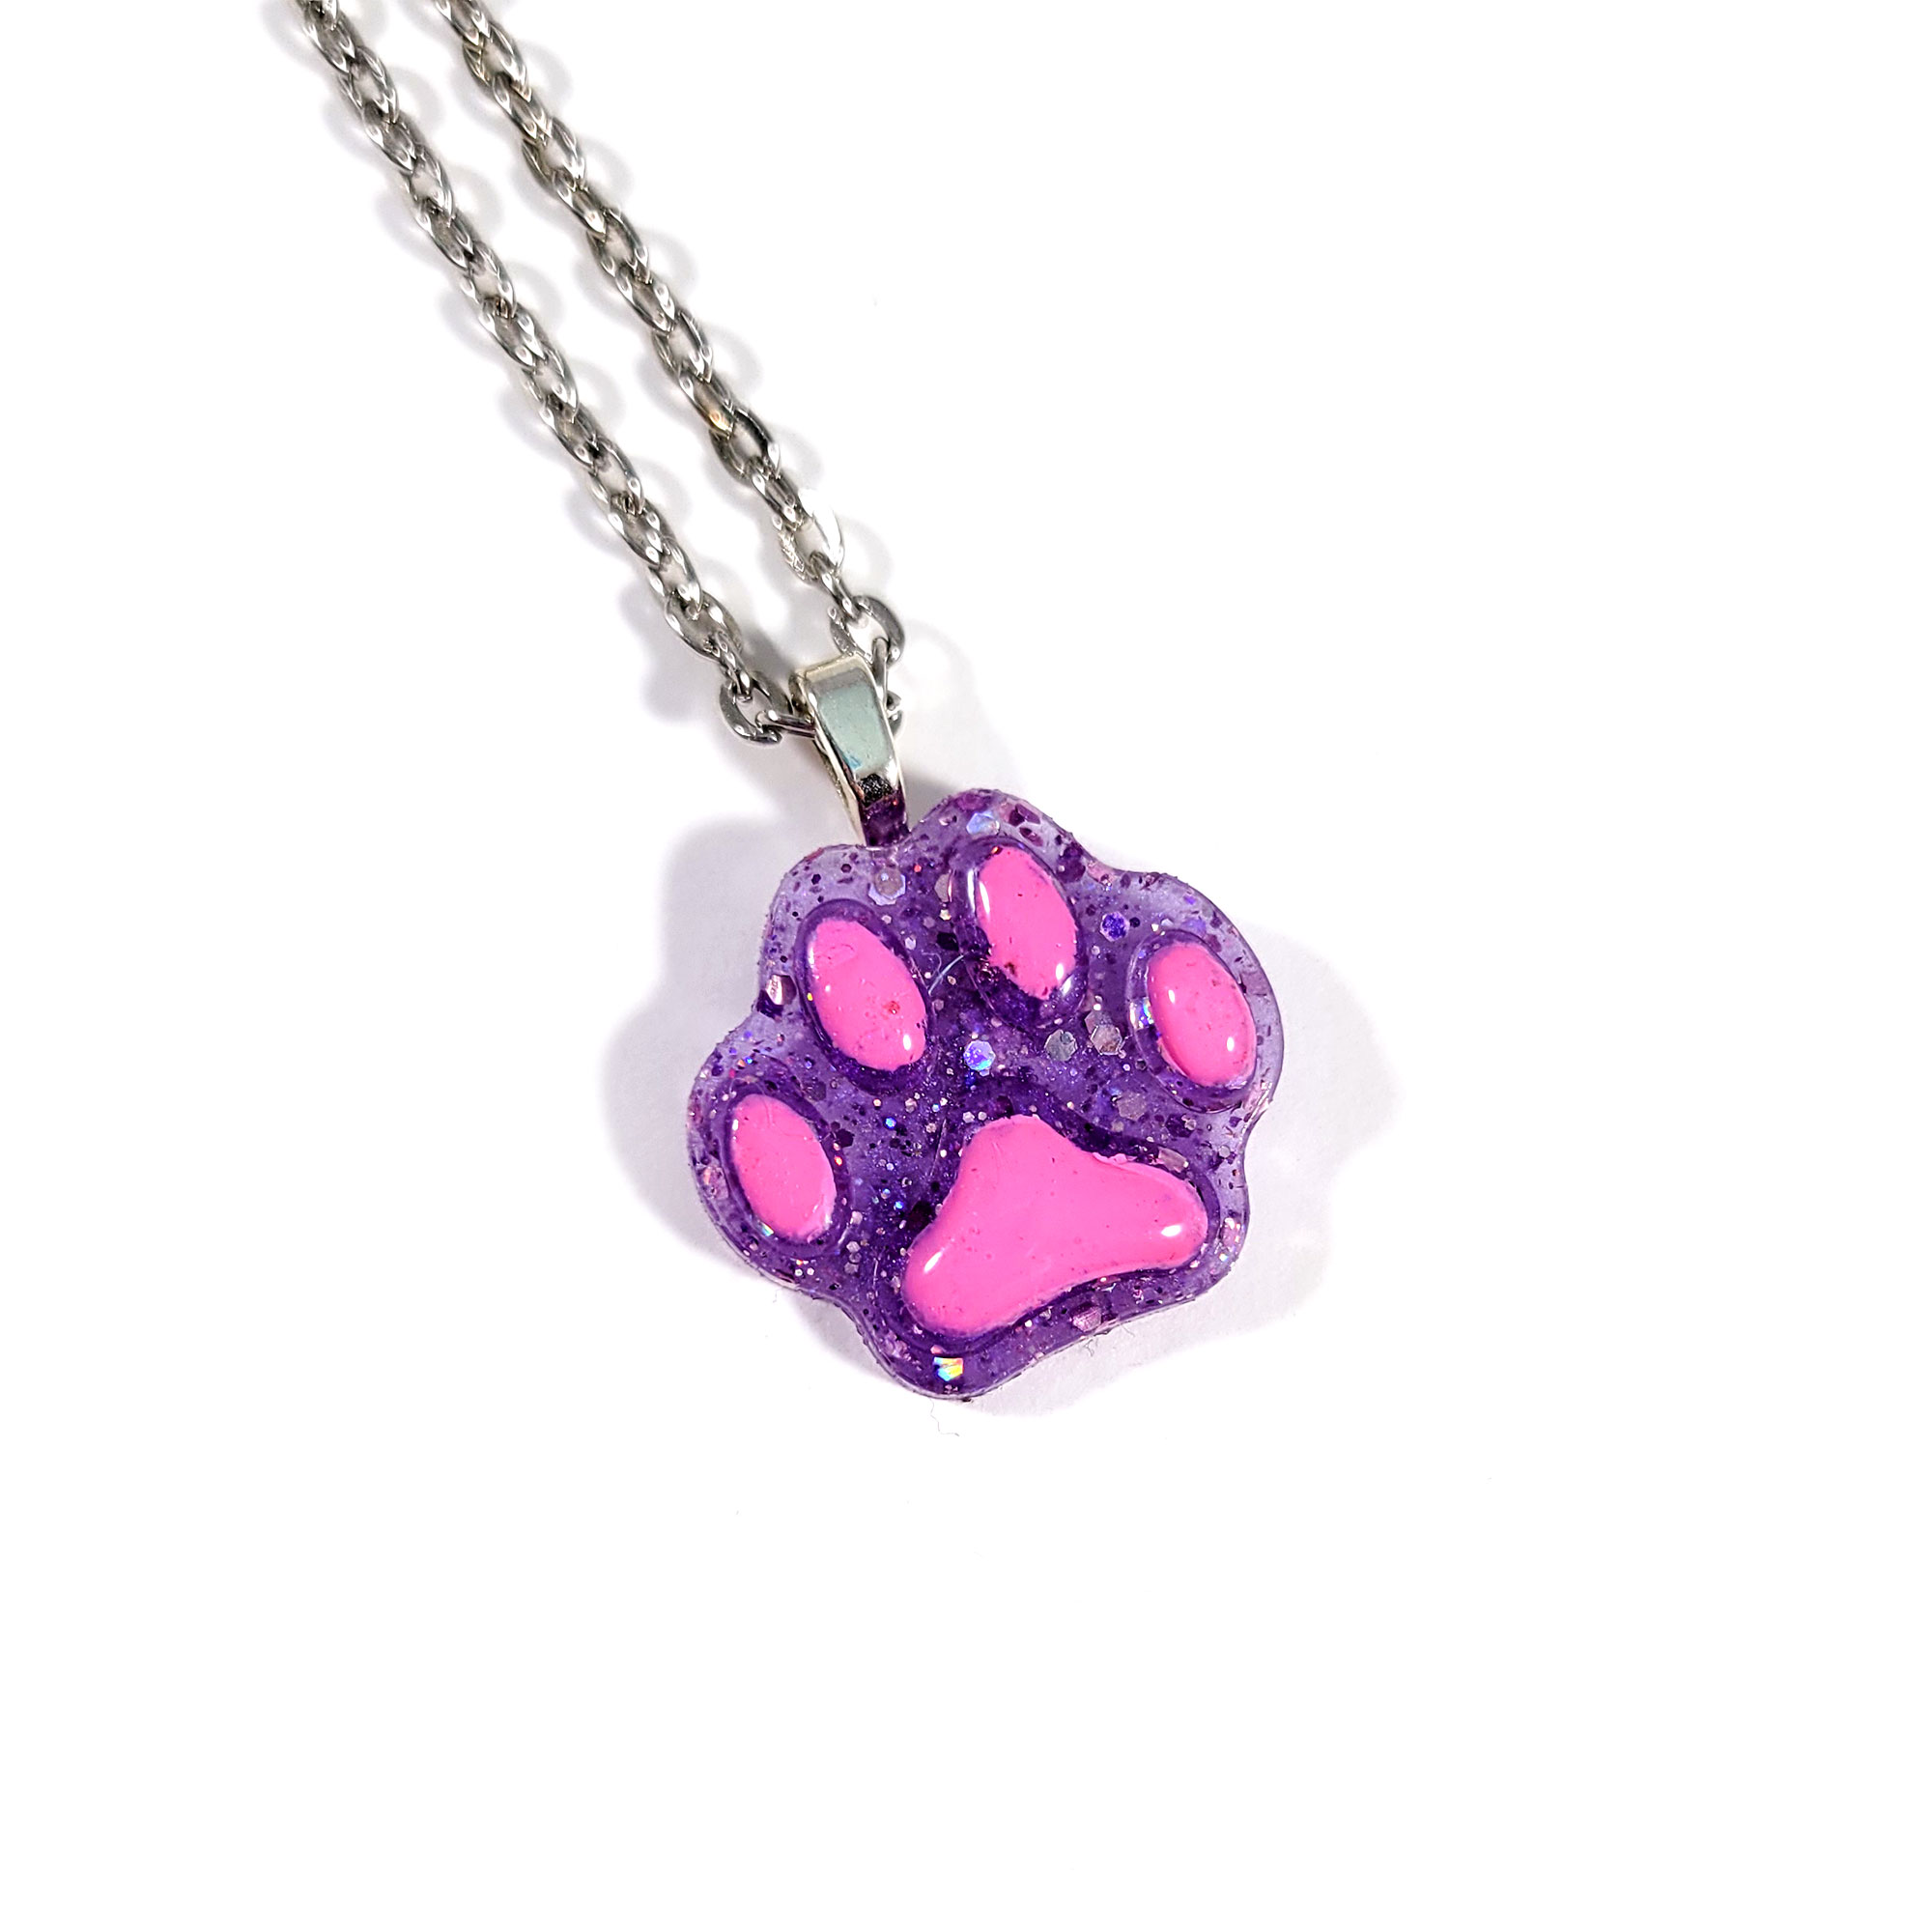 Cute Pawprint Necklaces by Wilde Designs